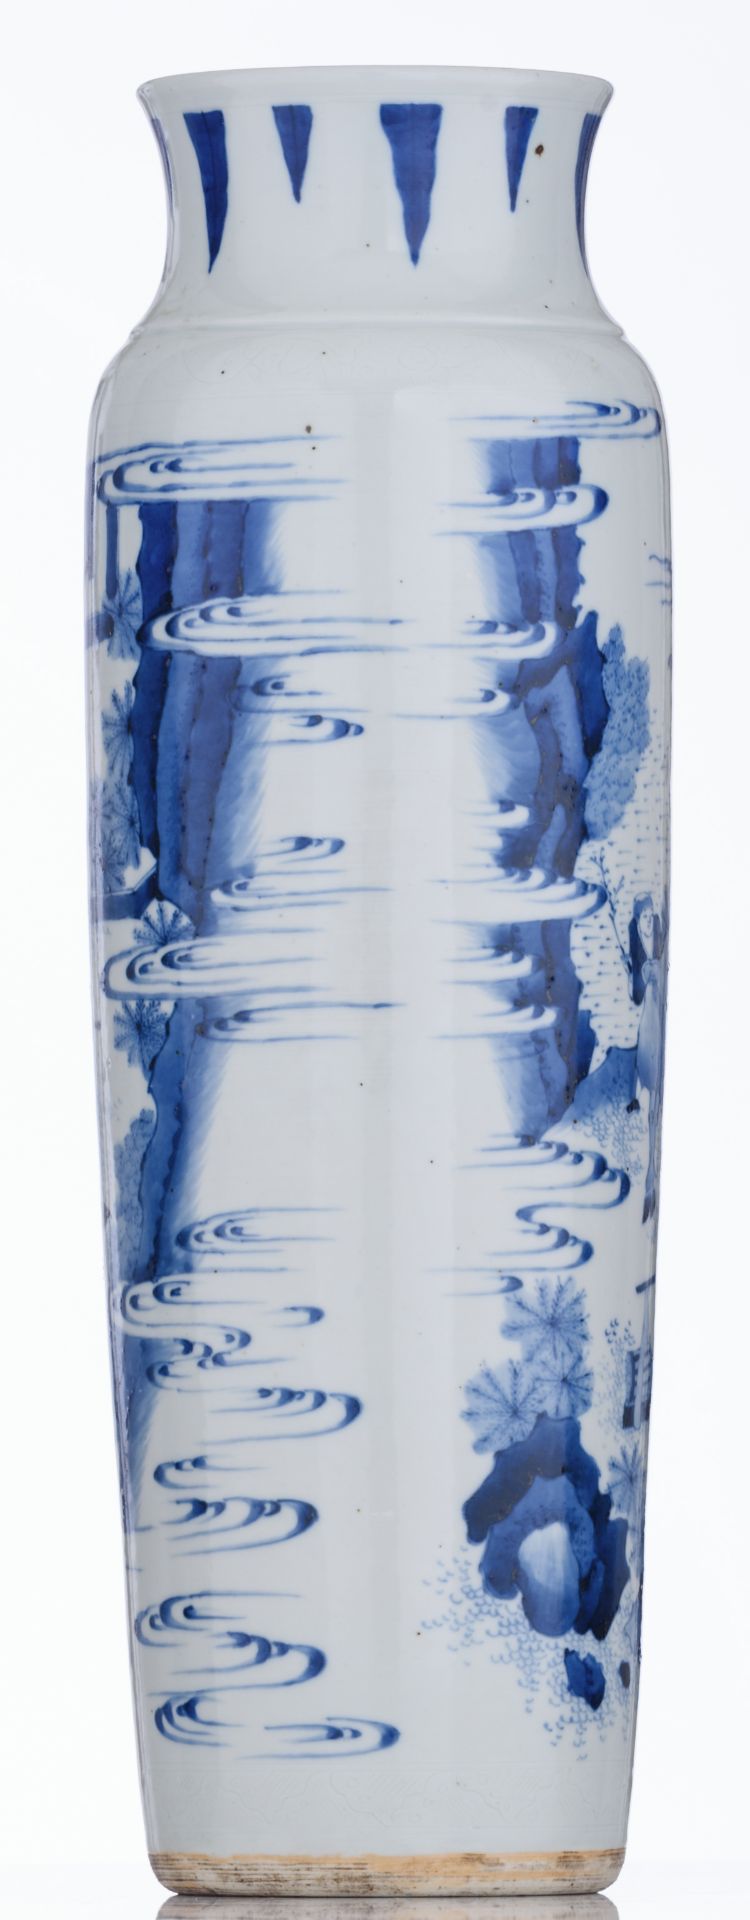 A Chinese Transitional period blue and white cylindrical vase with incised details, decorated with a - Image 8 of 22